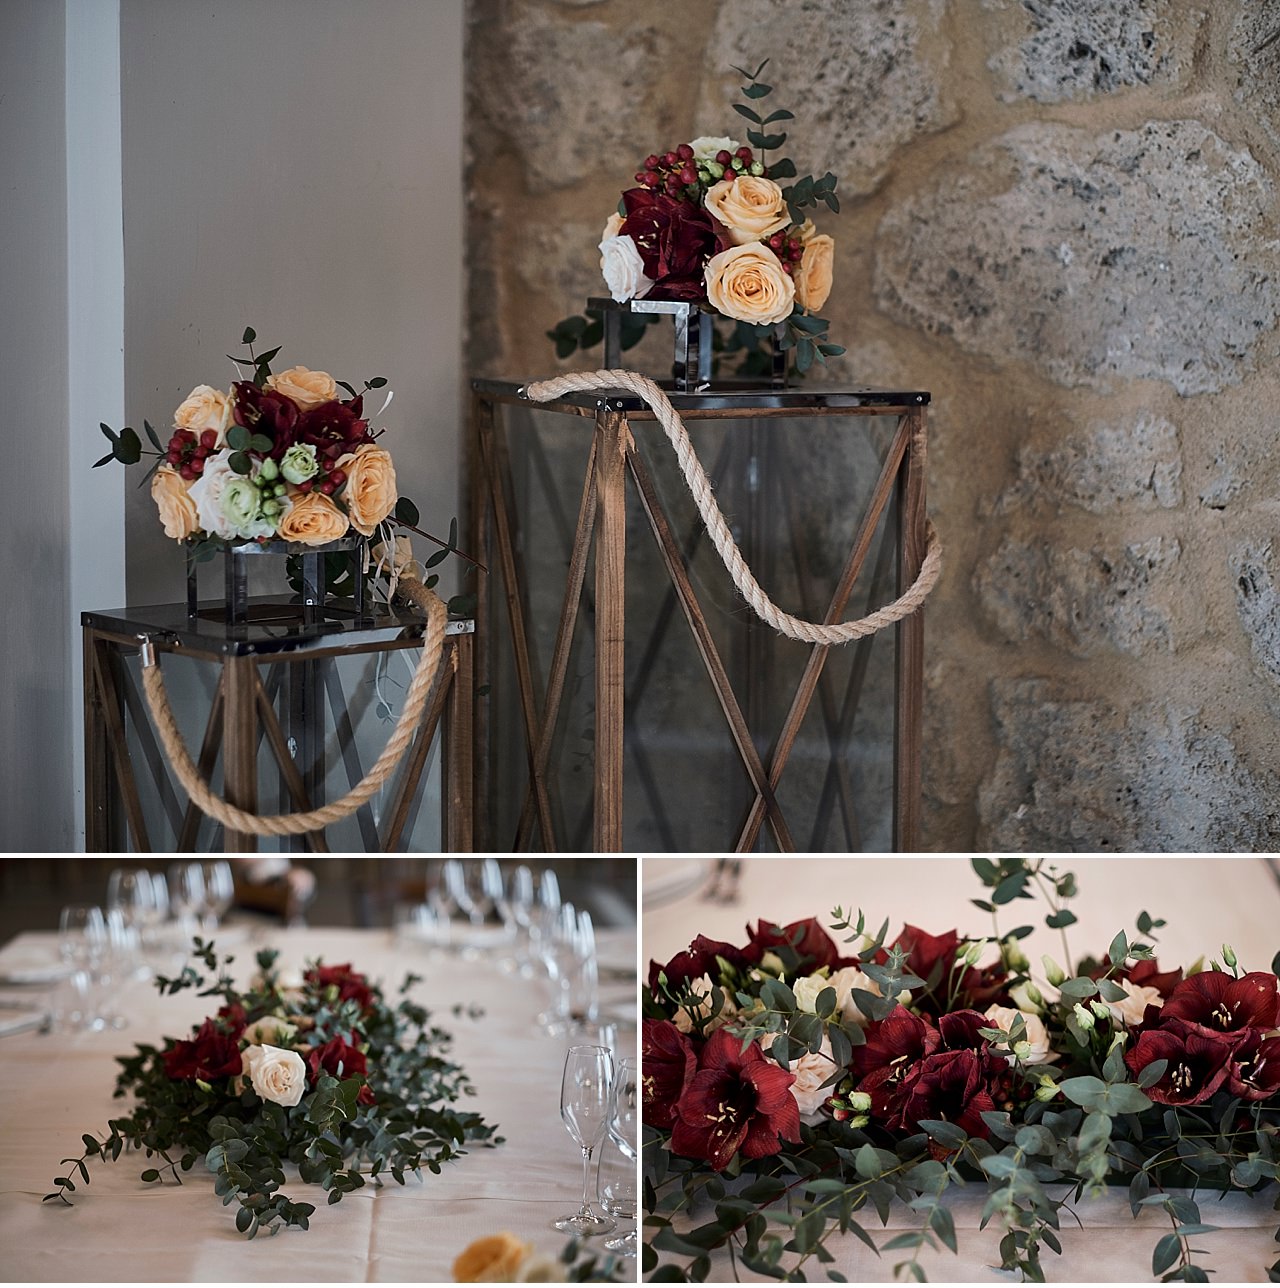  Intimate winter wedding in the splendid setting of the San Galgano Abbey, in Chiusdino in the province of Siena. A civil ceremony sanctioned by the mayor under the sky, as the structure has no roof. A magical place, a simple but very elegant floral 